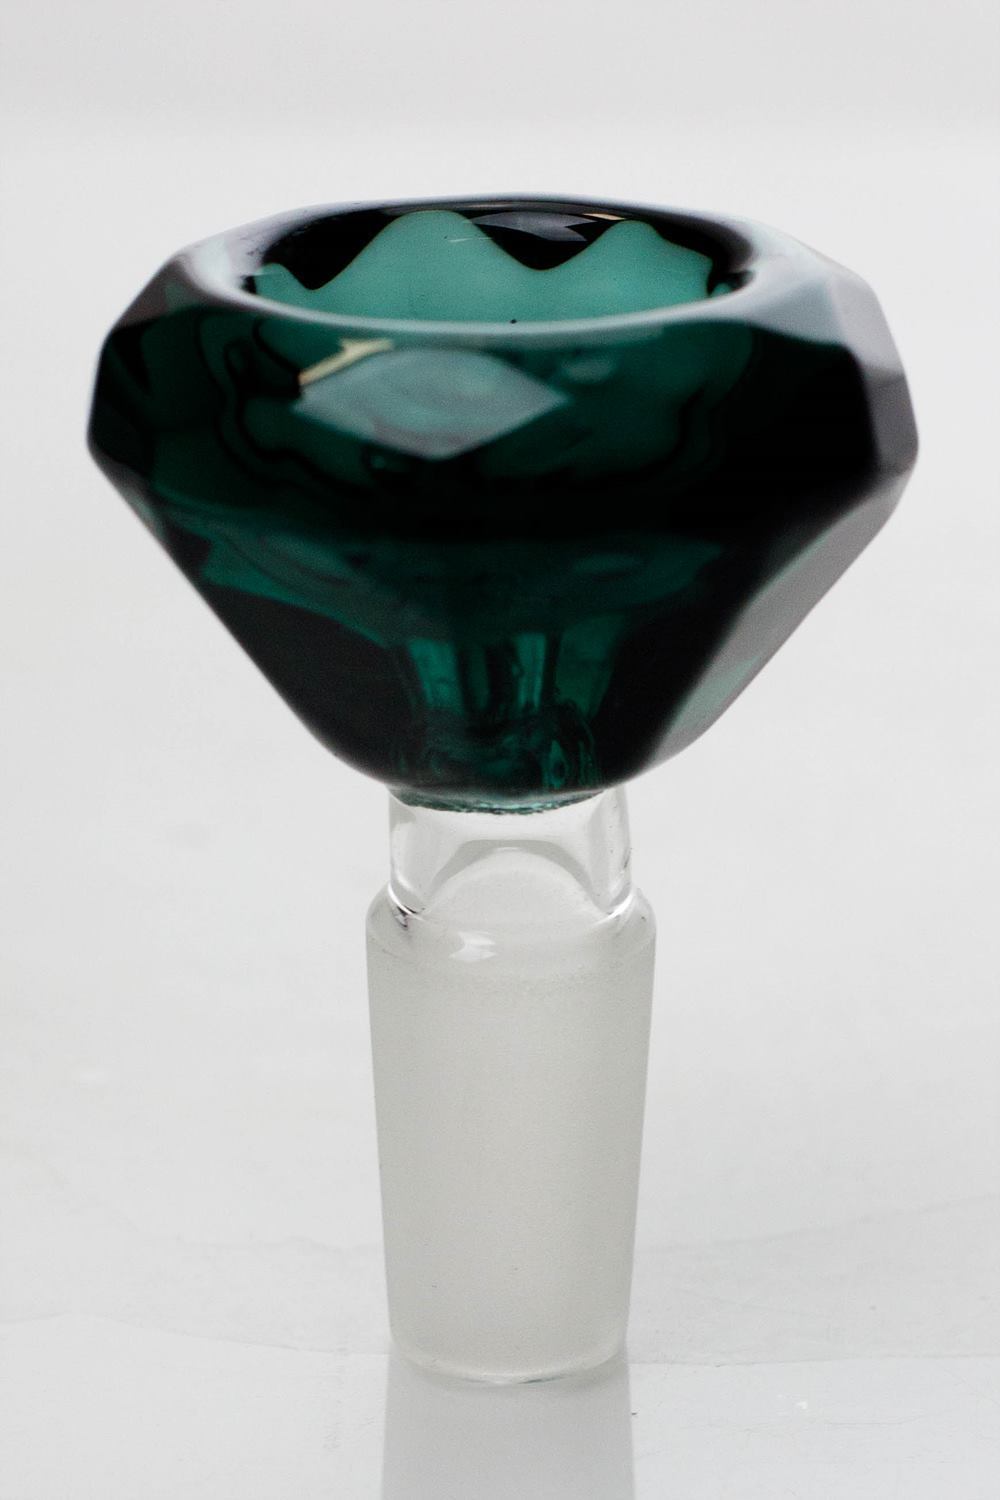 Diamond cutting shape wide glass bowl Flower Power Packages Teal-4076 14 mm female joint 